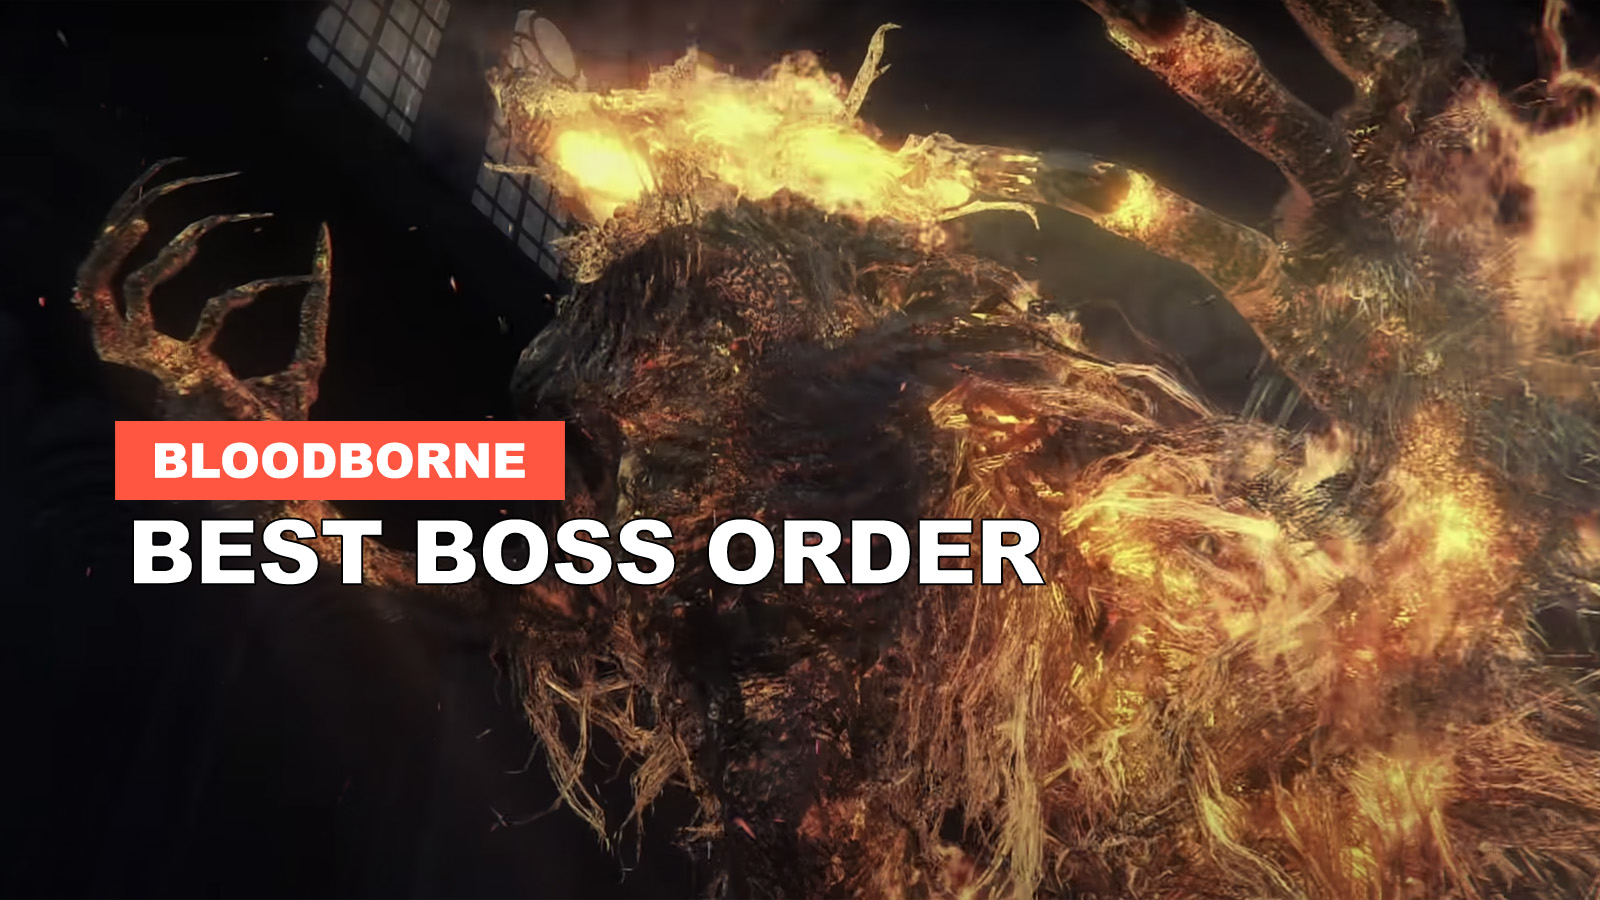 Bloodborne Boss Order – All Mandatory And Optional Bosses With DLC